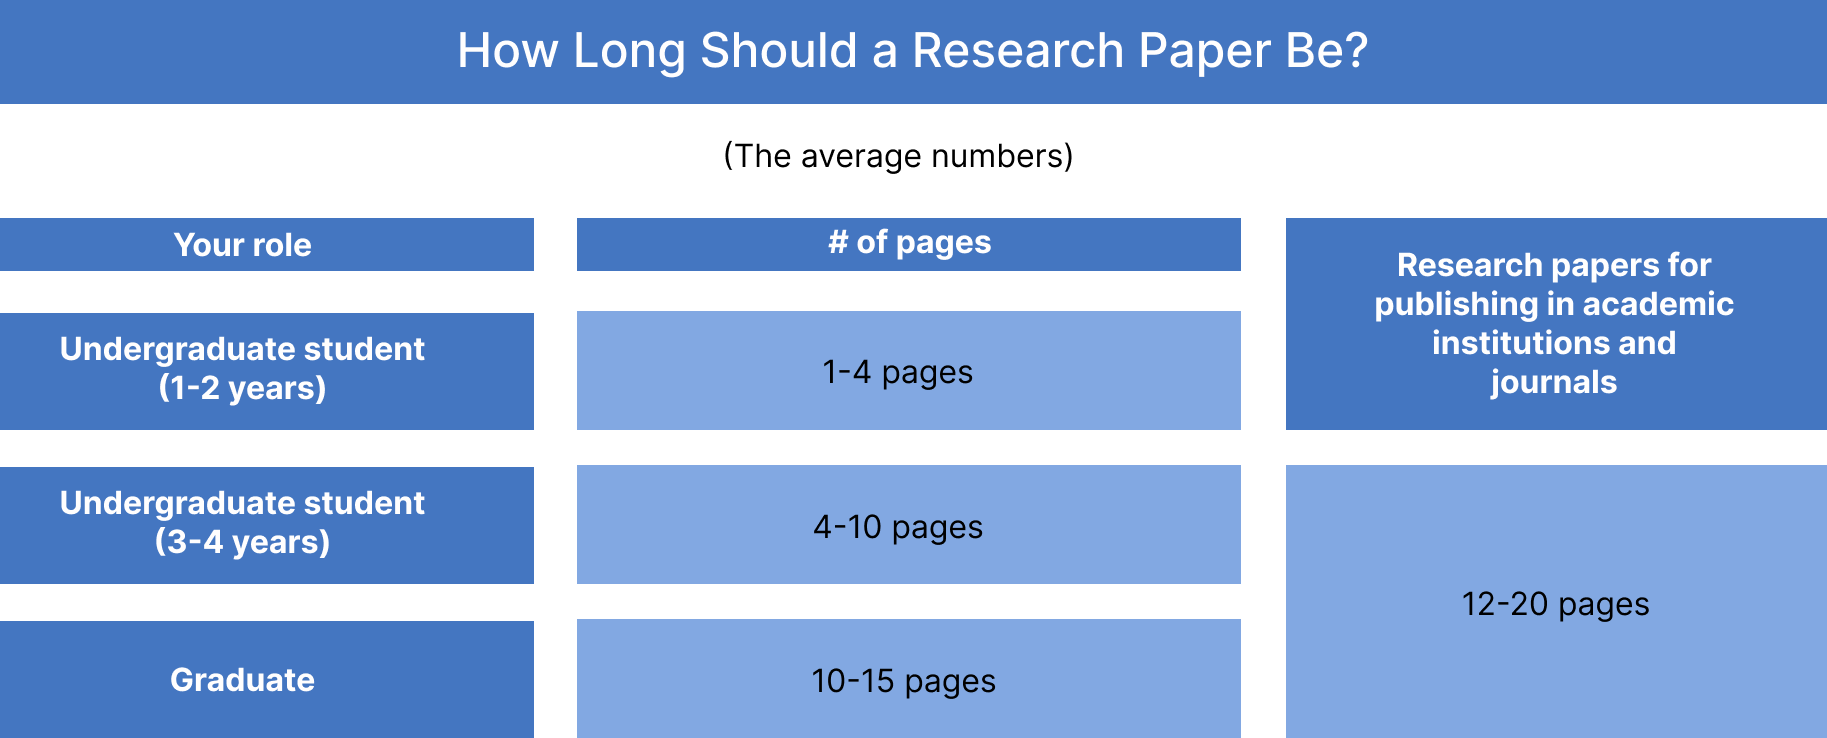 short research paper length